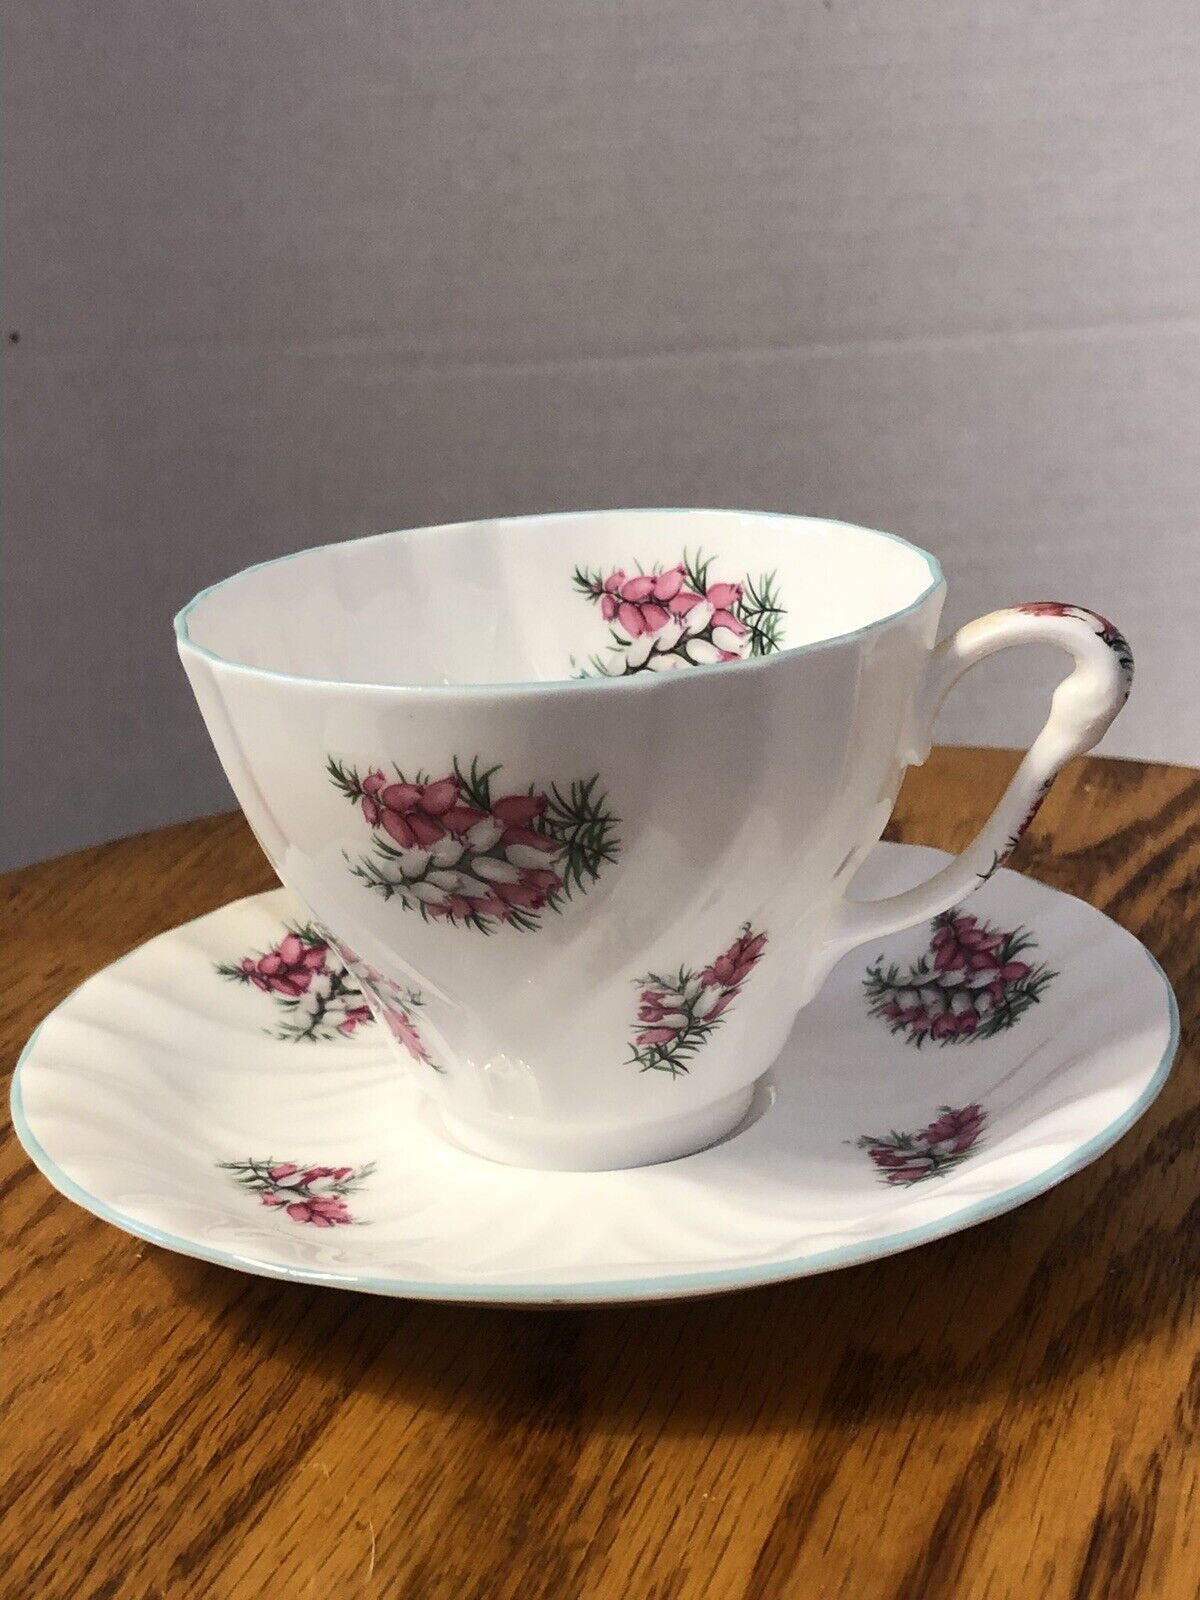 Princess Anne Teacup And Saucer. Vintage Fine Bone China. Made In England.